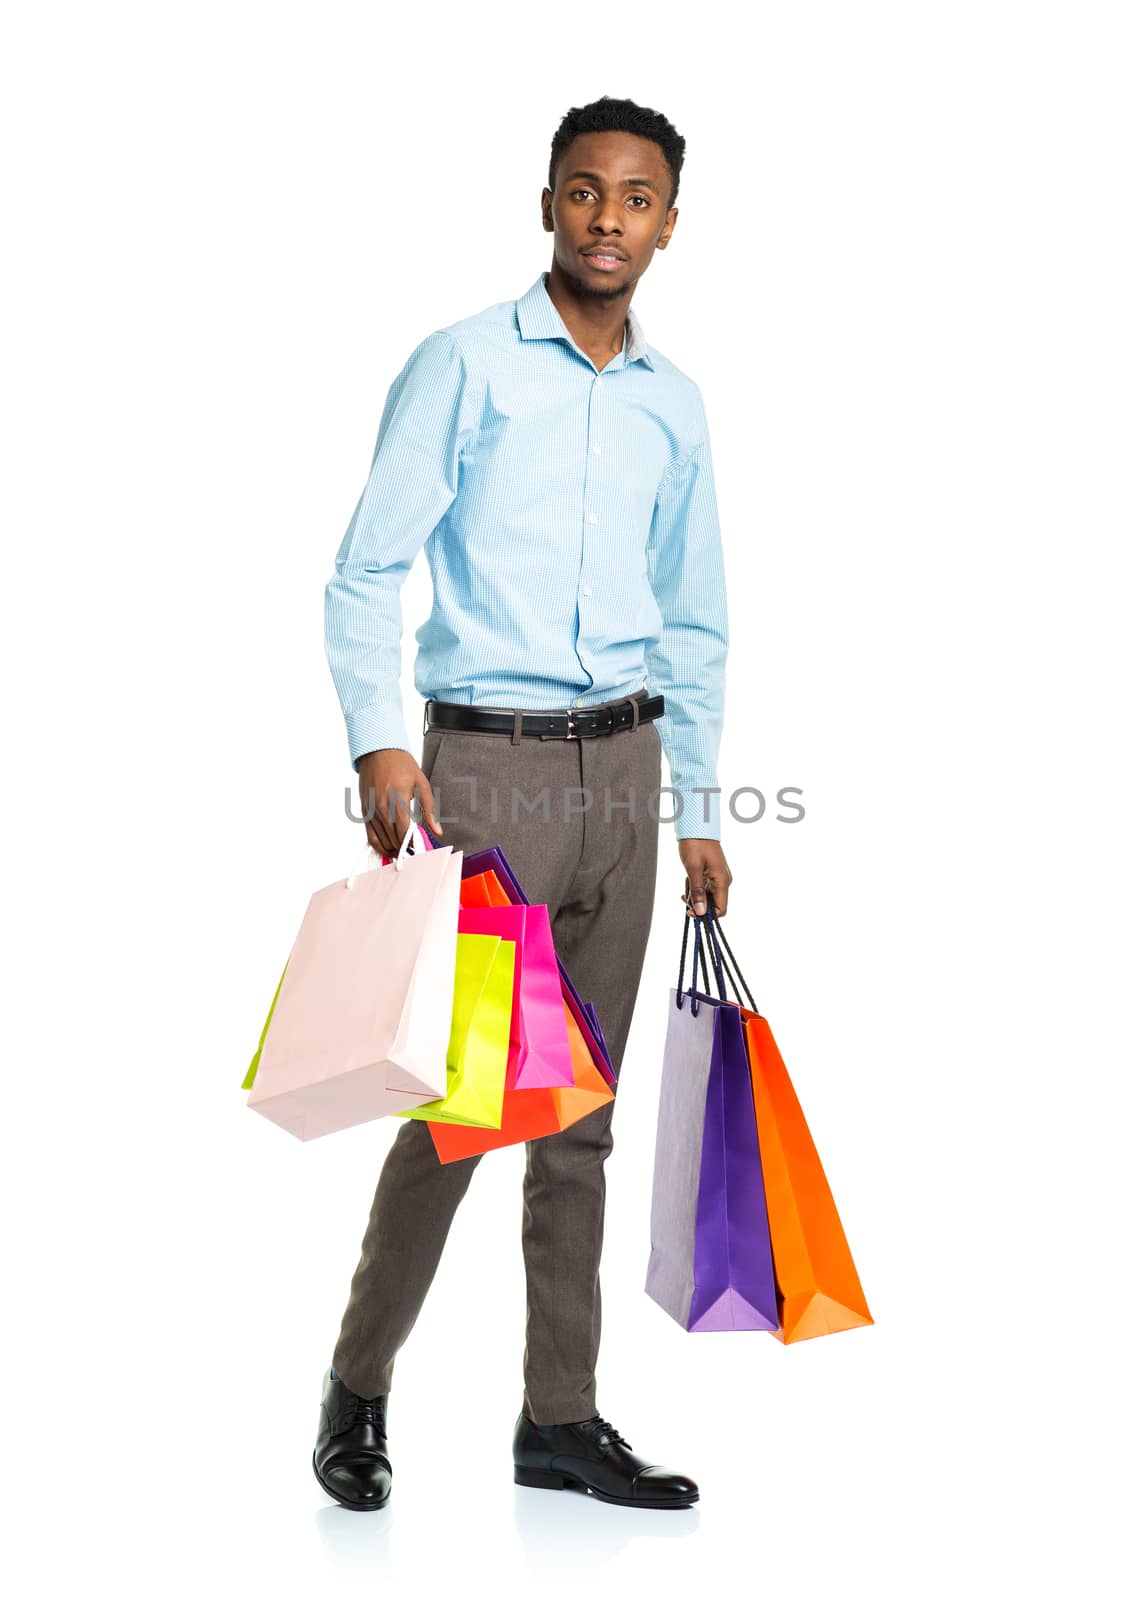 African american man holding shopping bags on white background. Holidays concept